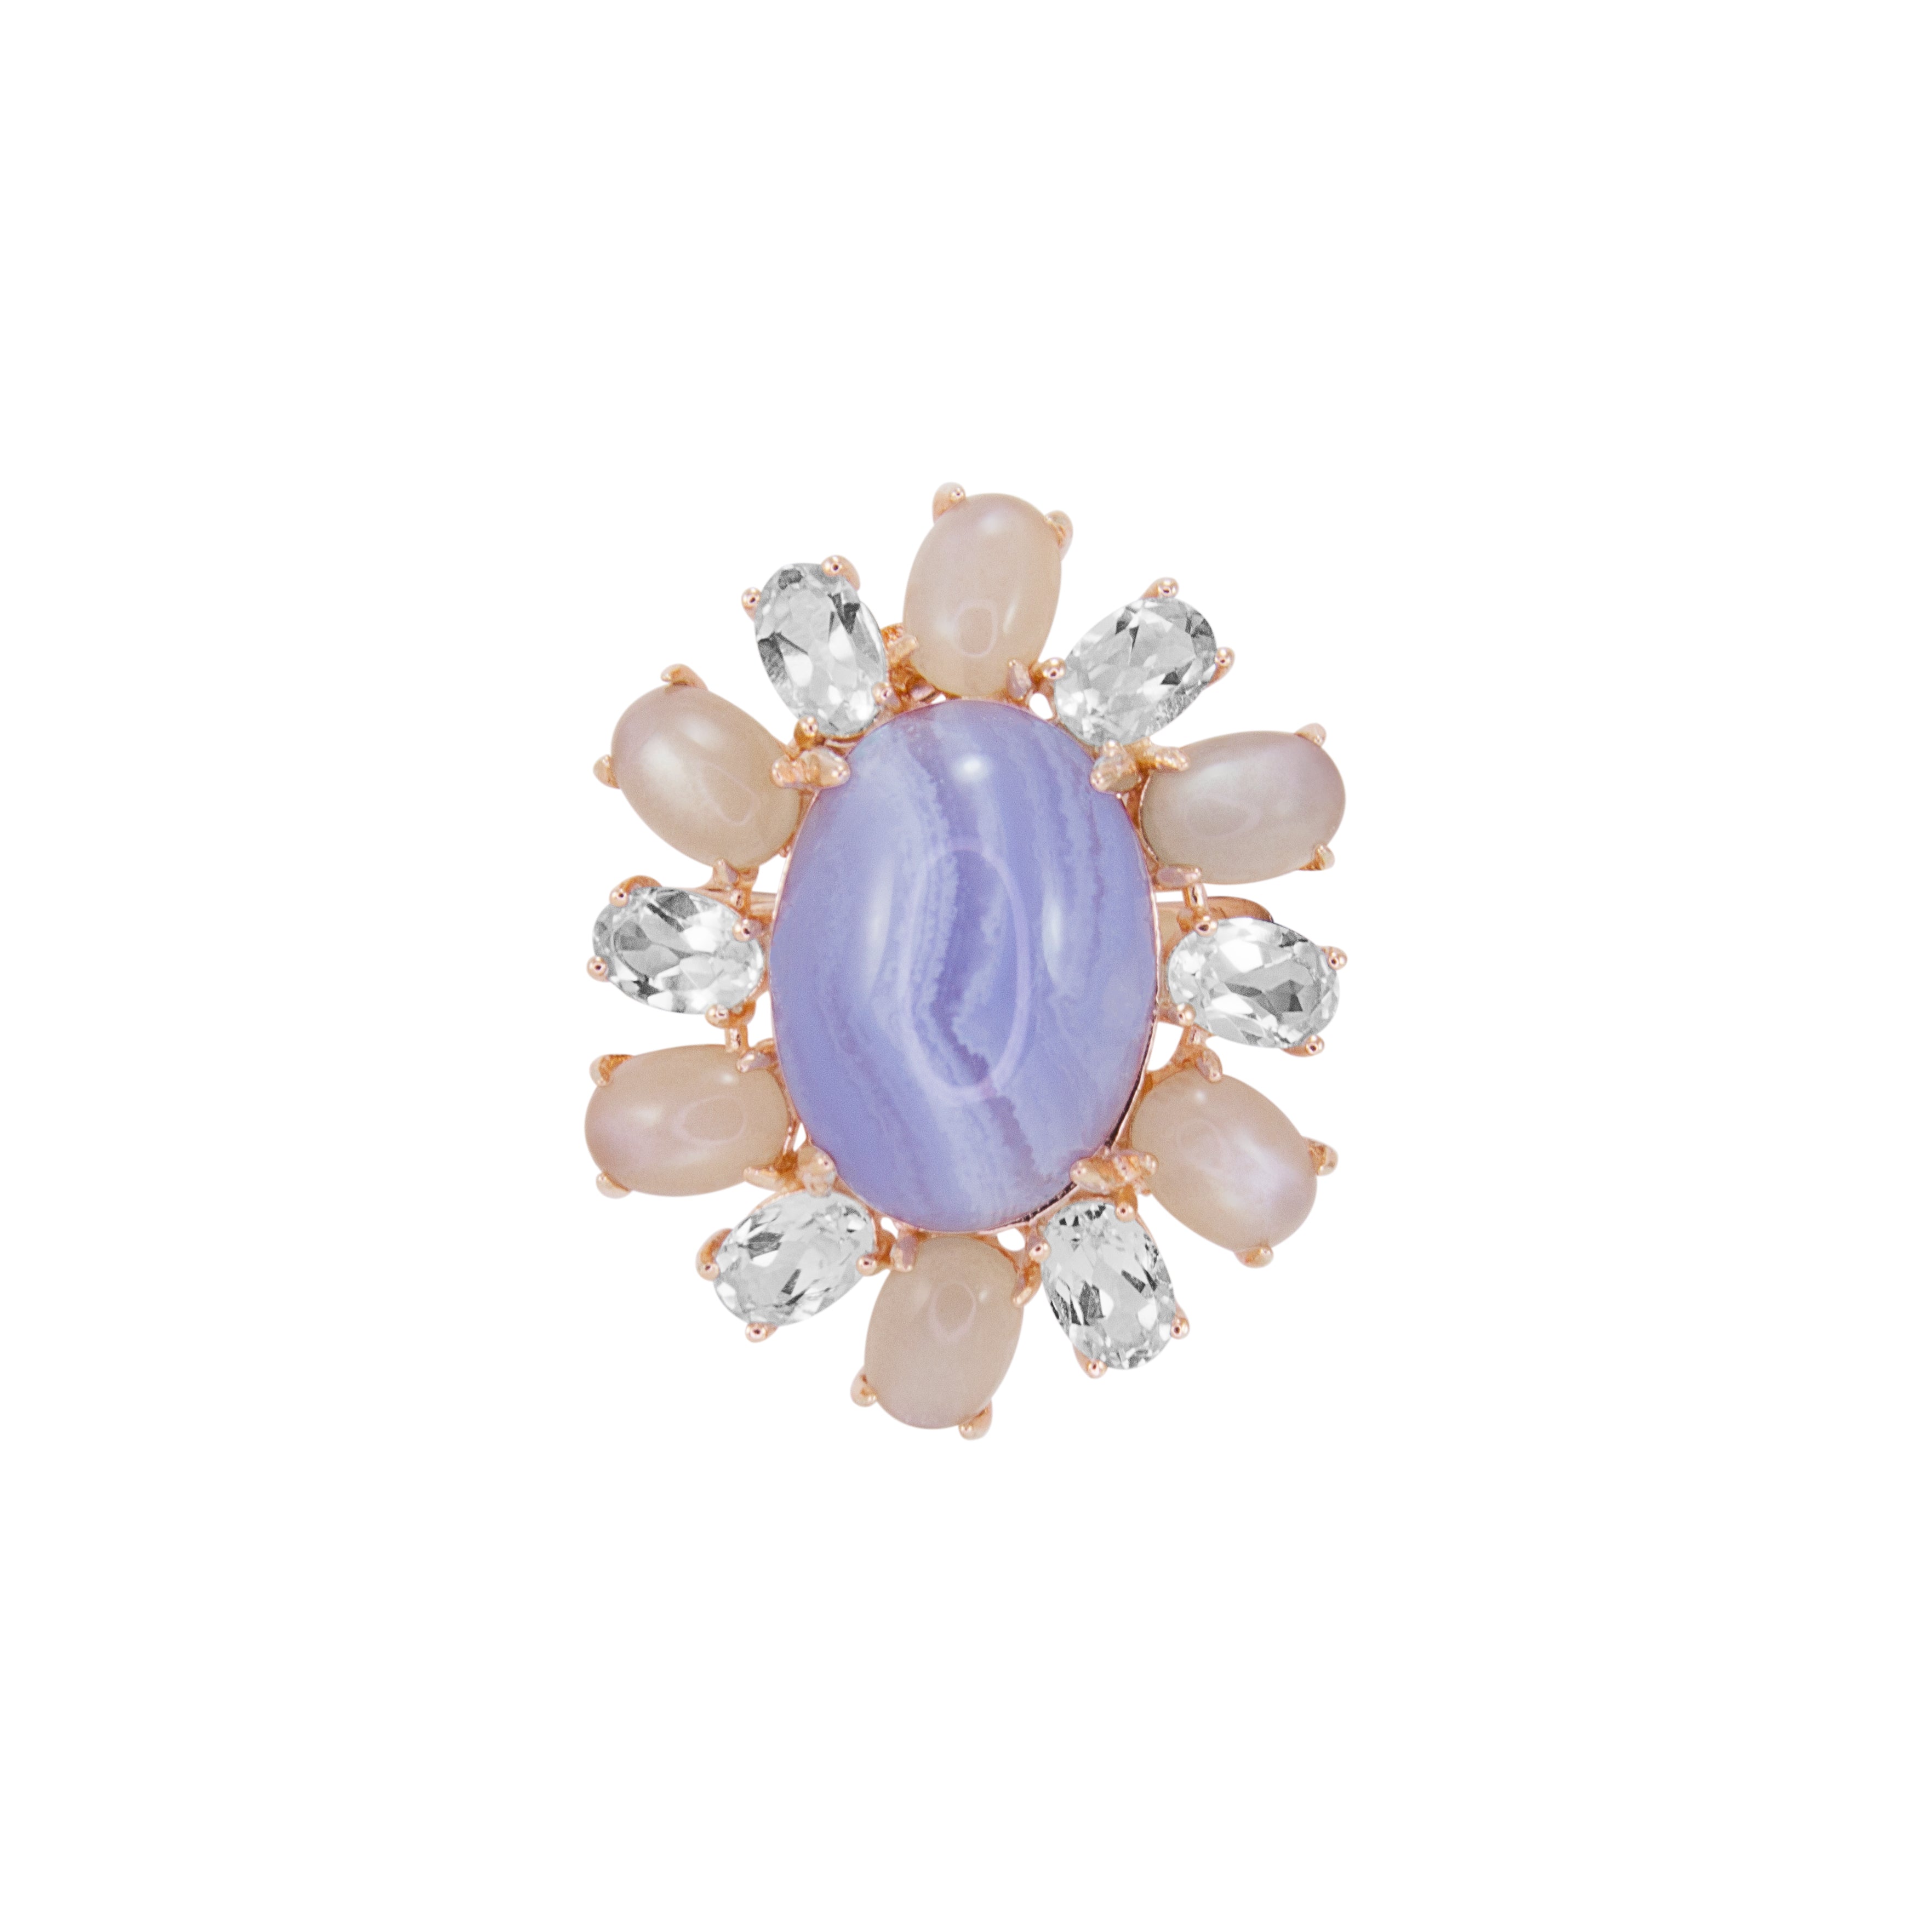 Lace Agate, Topaz & Moonstone Ring